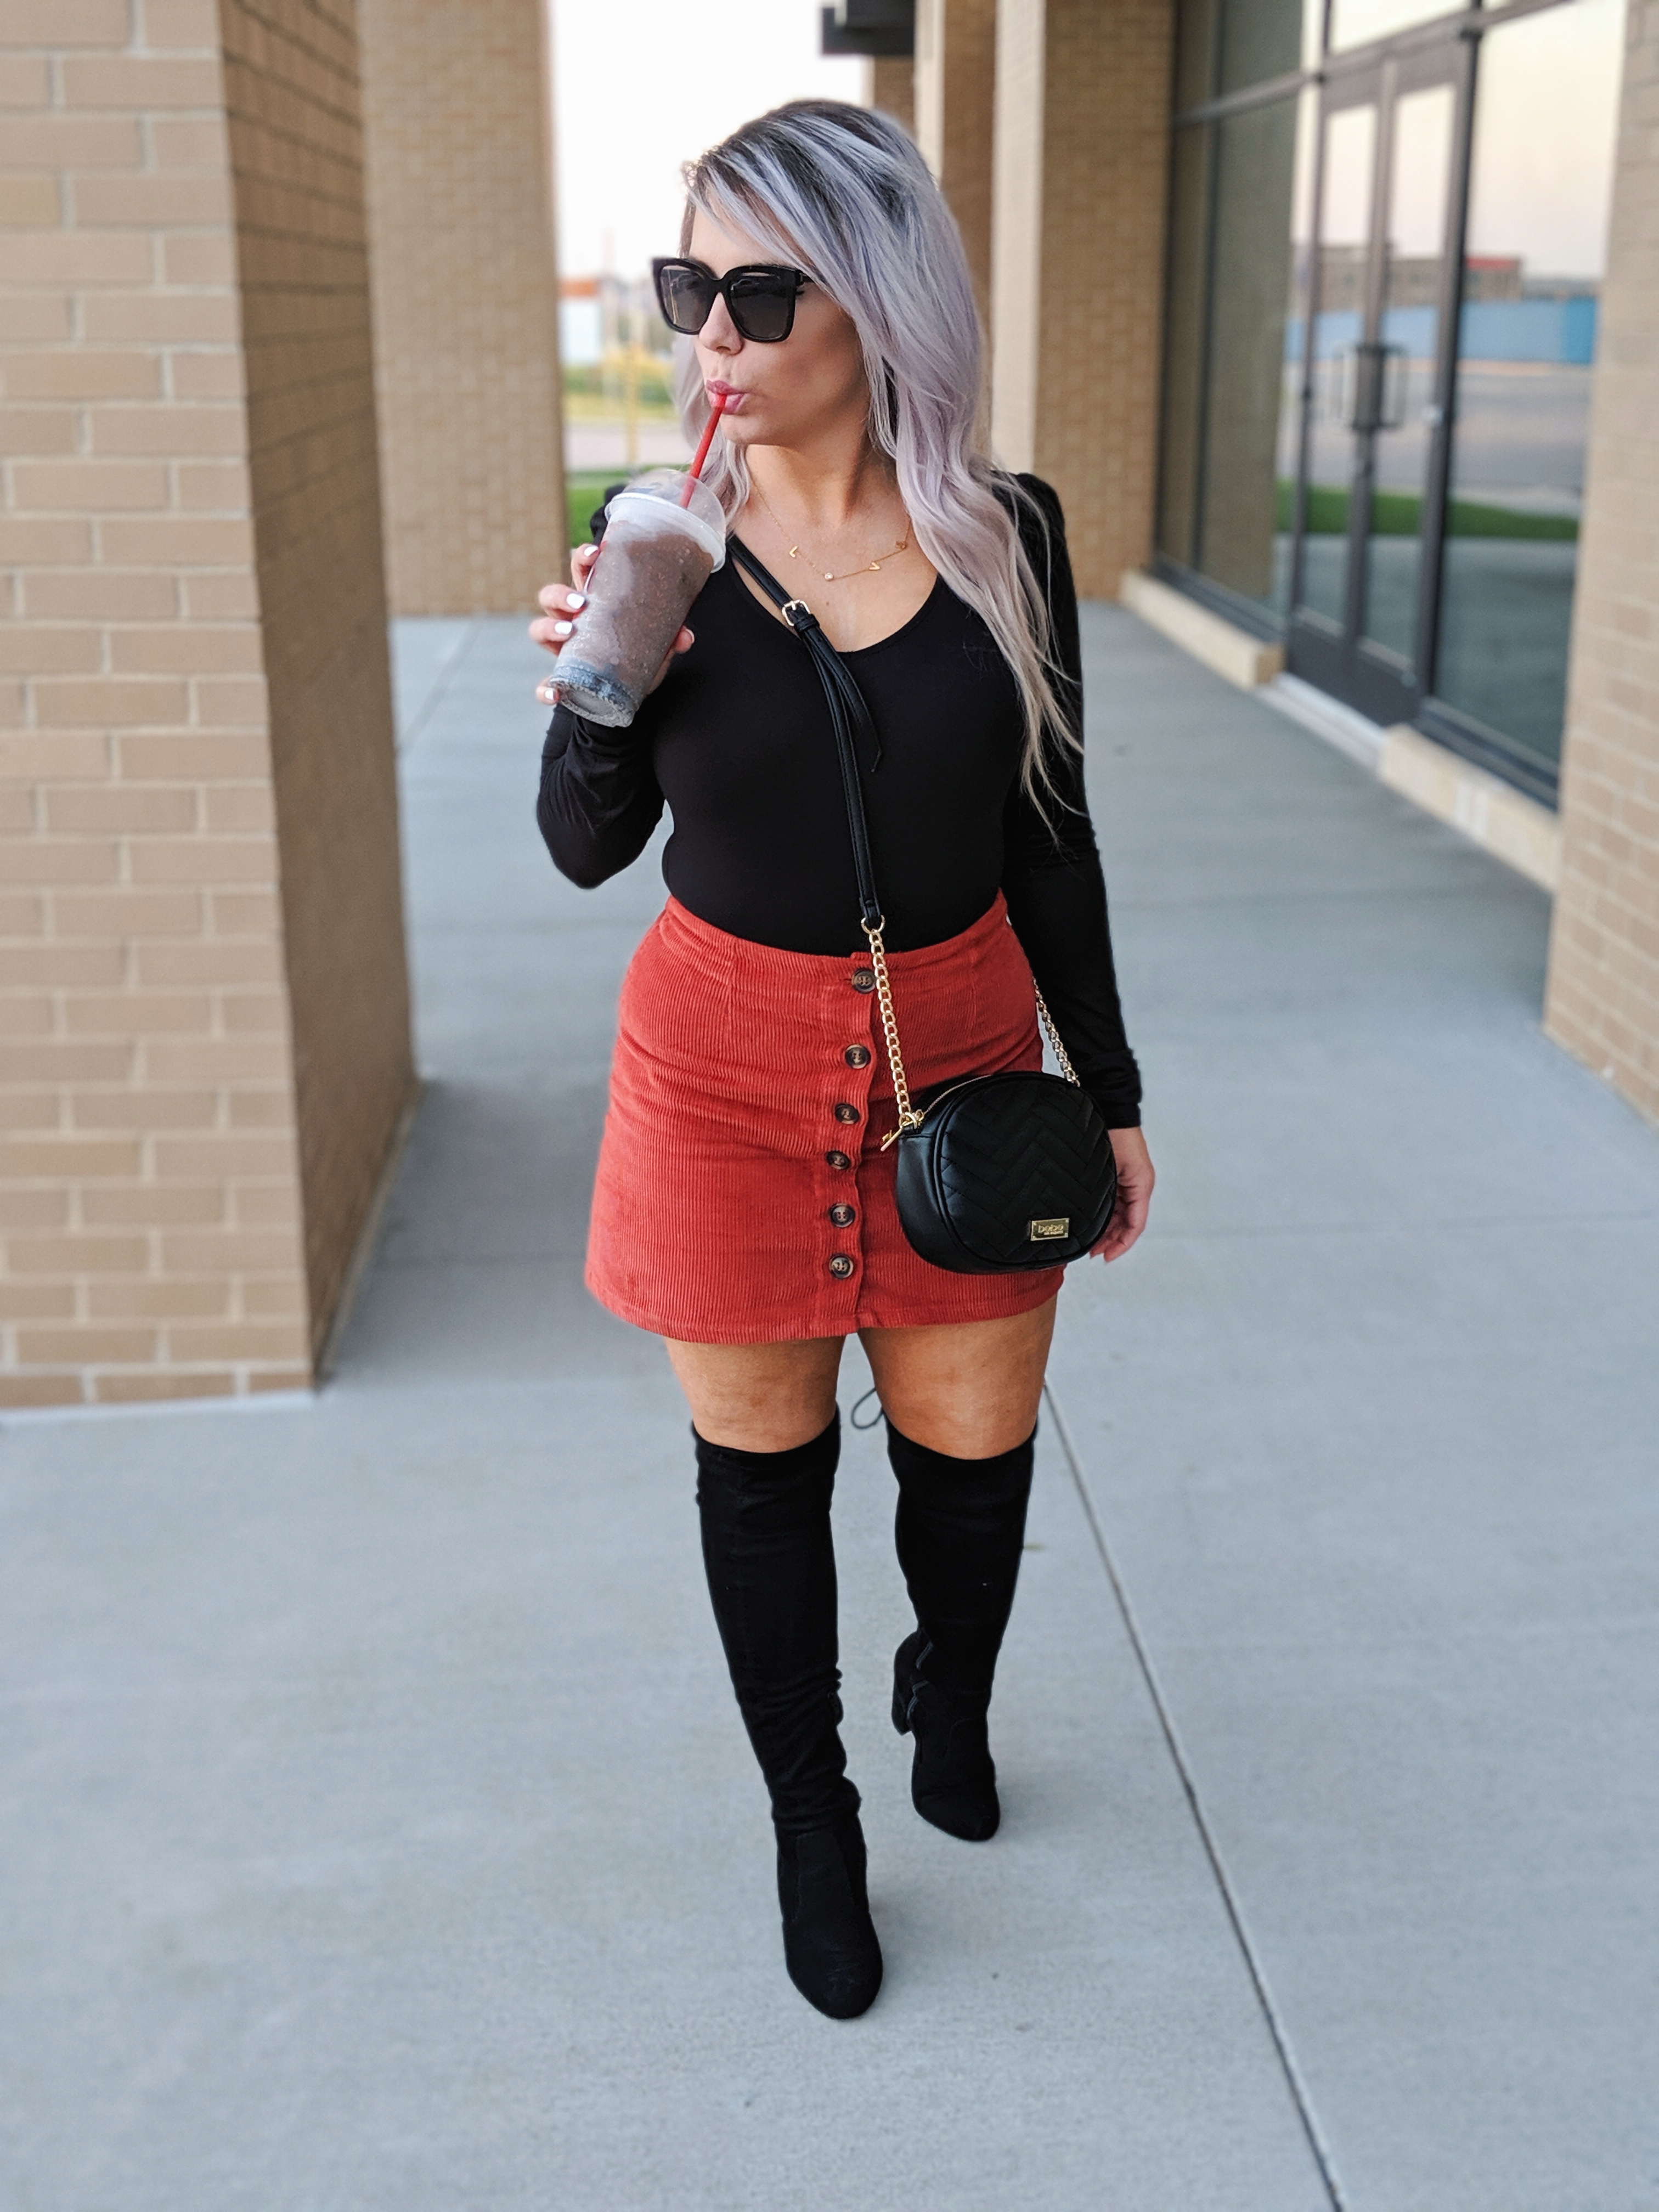 Corduroy Skirt Outfits - Fall Outfits 2019: (ad) Scored this black bodysuit, corduroy skirt, and crossbody bag at Gordmans during their Grand Opening Tour! I shopped the Gordmans in Dyersburg, TN and let me tell you, their prices are too good to pass up! Loving this cute button up corduroy skirt for fall 2019! #GotitatGordmans #GordmansGrandOpeningTour #gthanks 